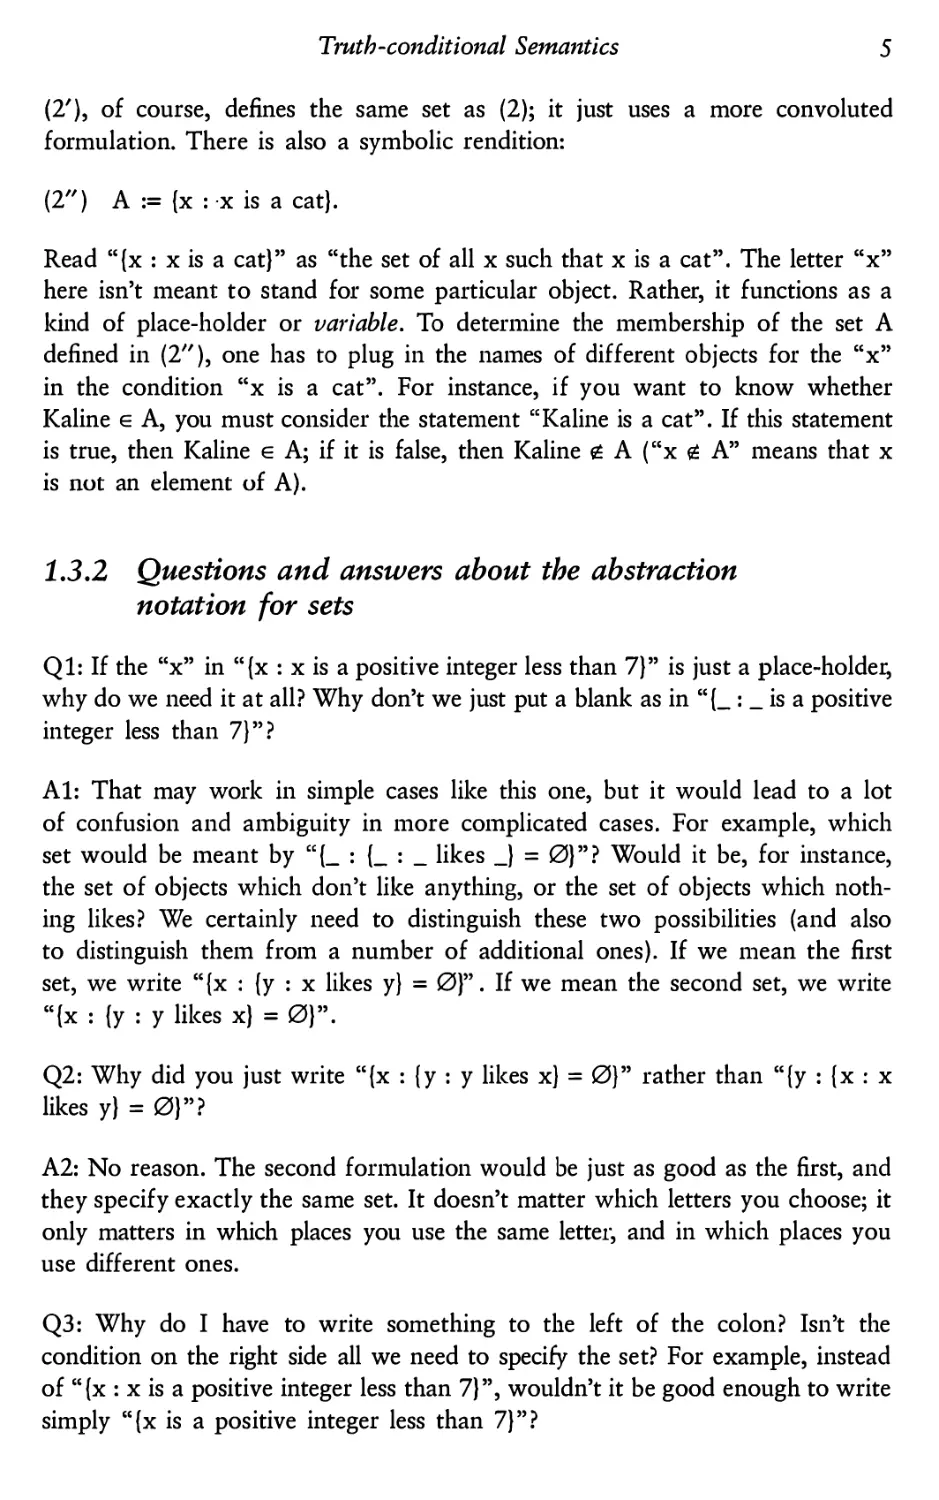 1.3.2 Questions and answers about the abstraction notation for sets